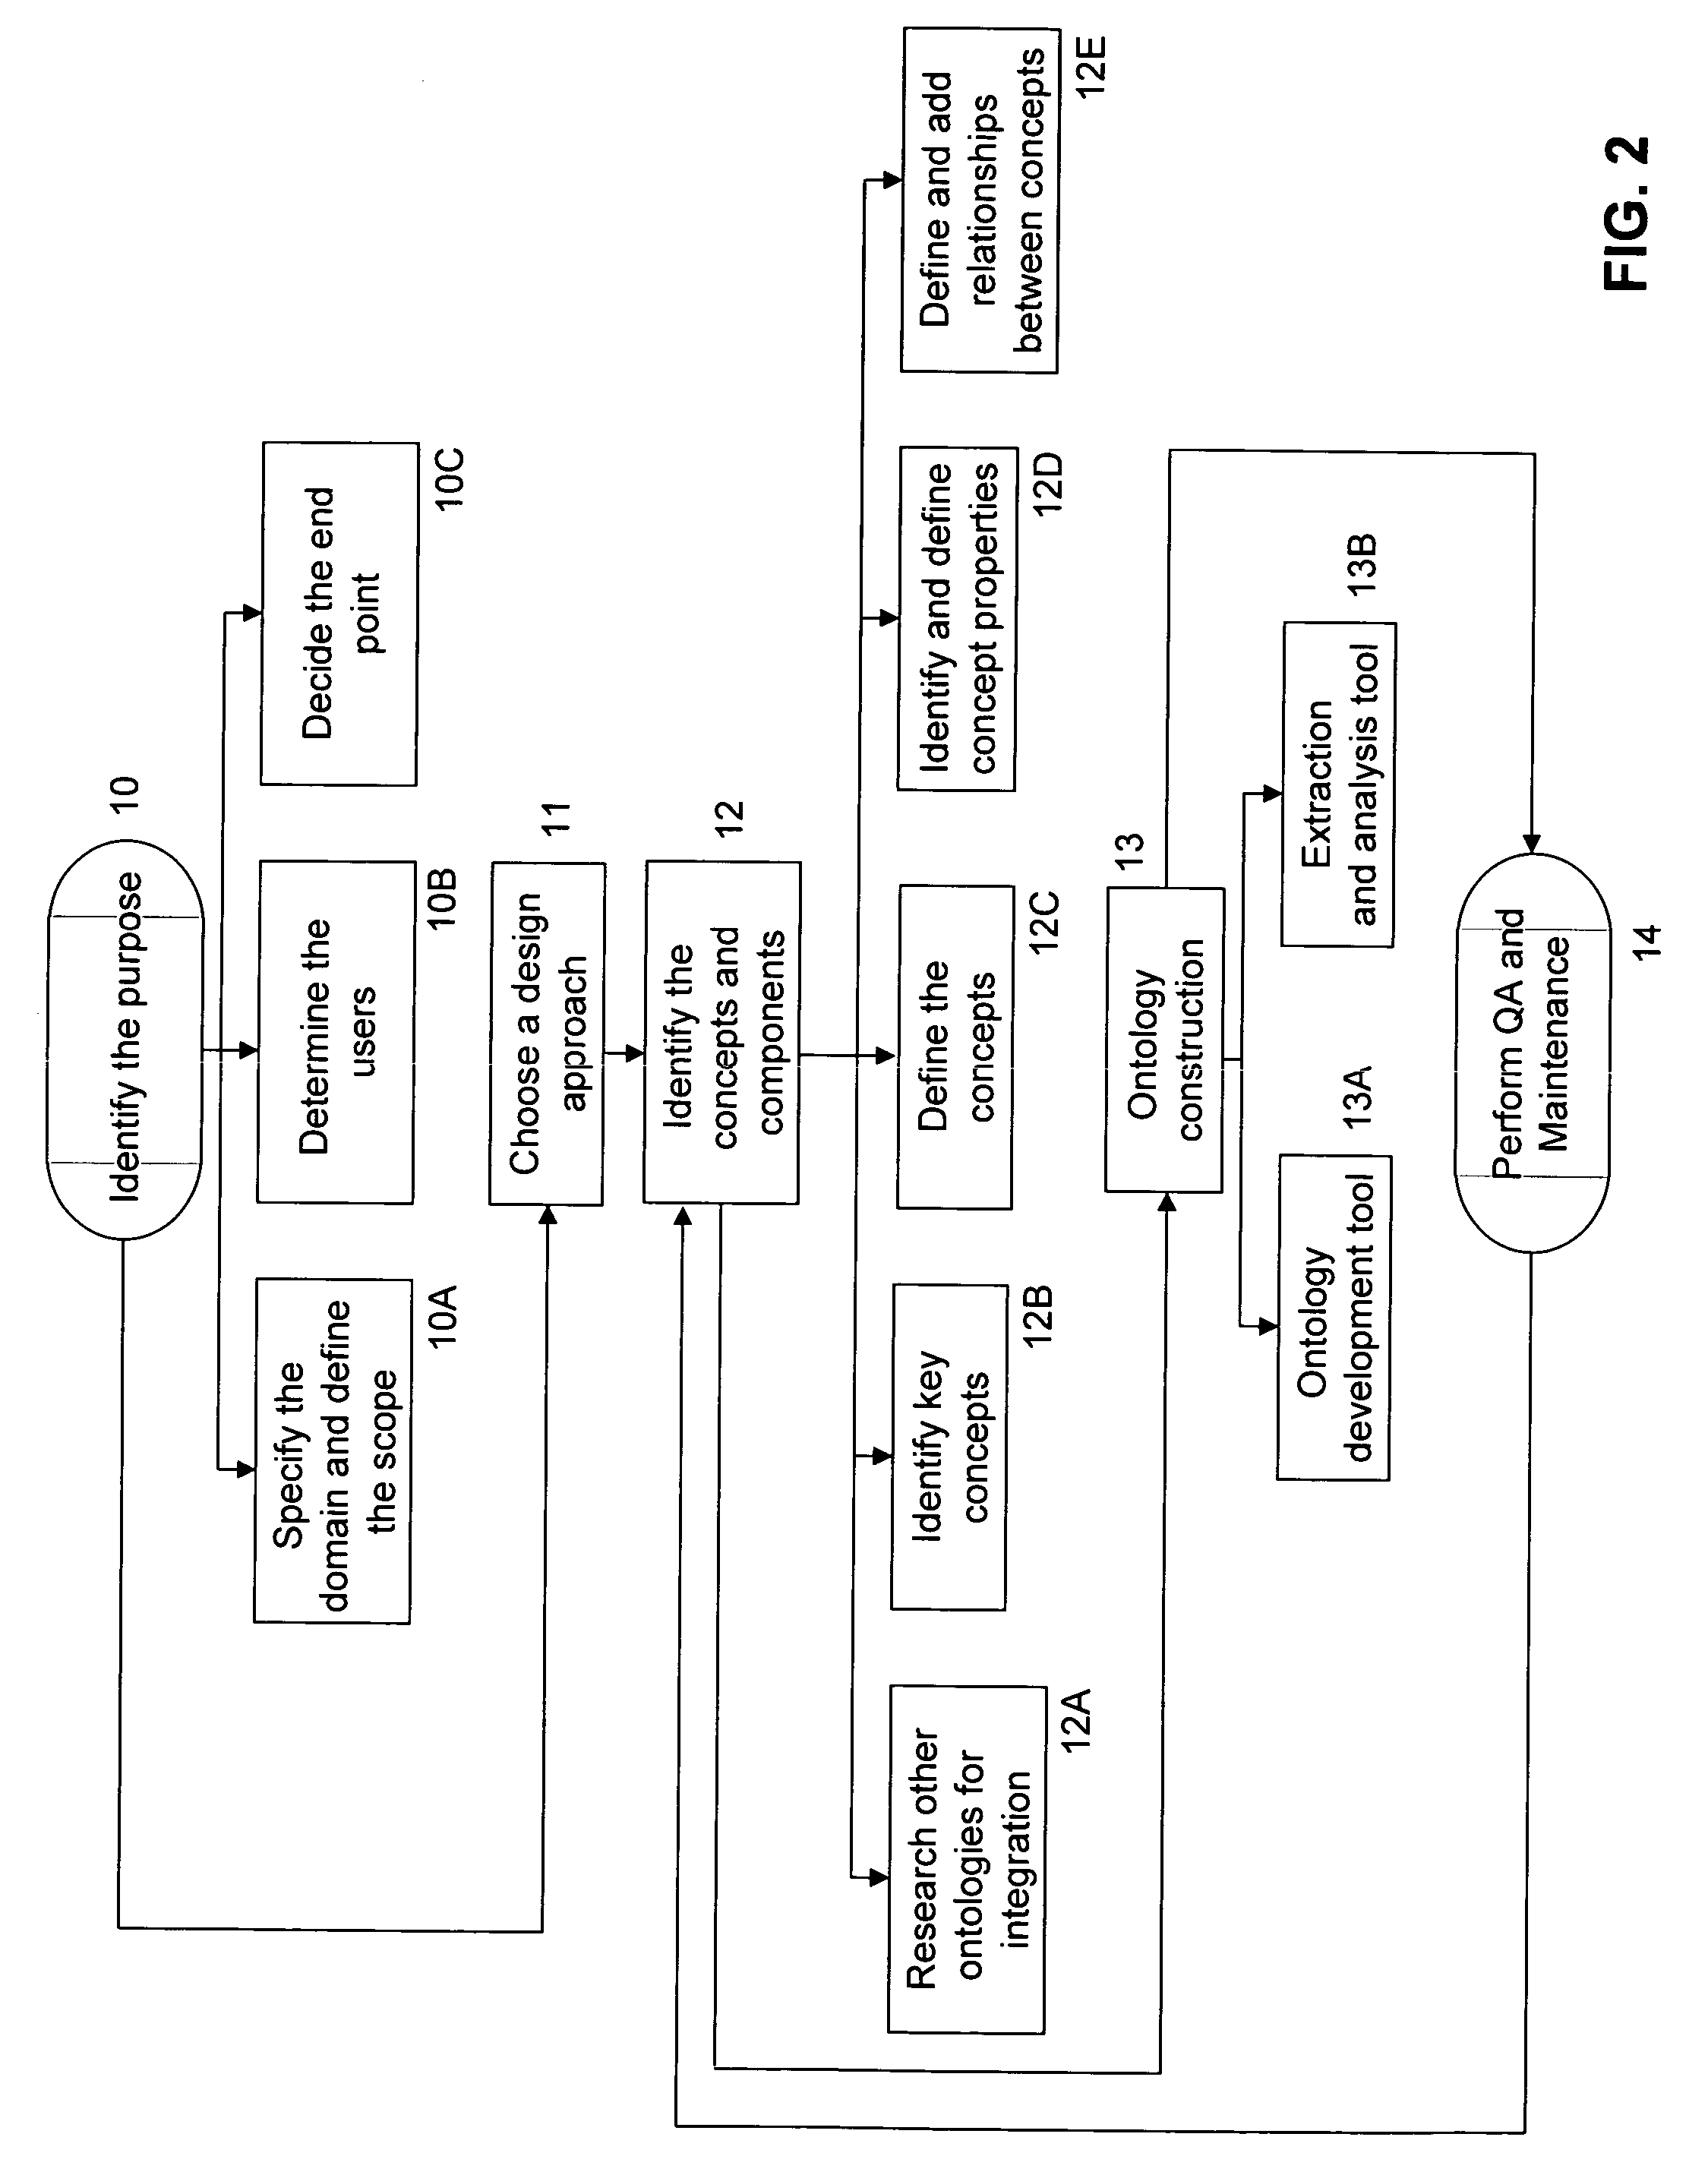 Information system using healthcare ontology